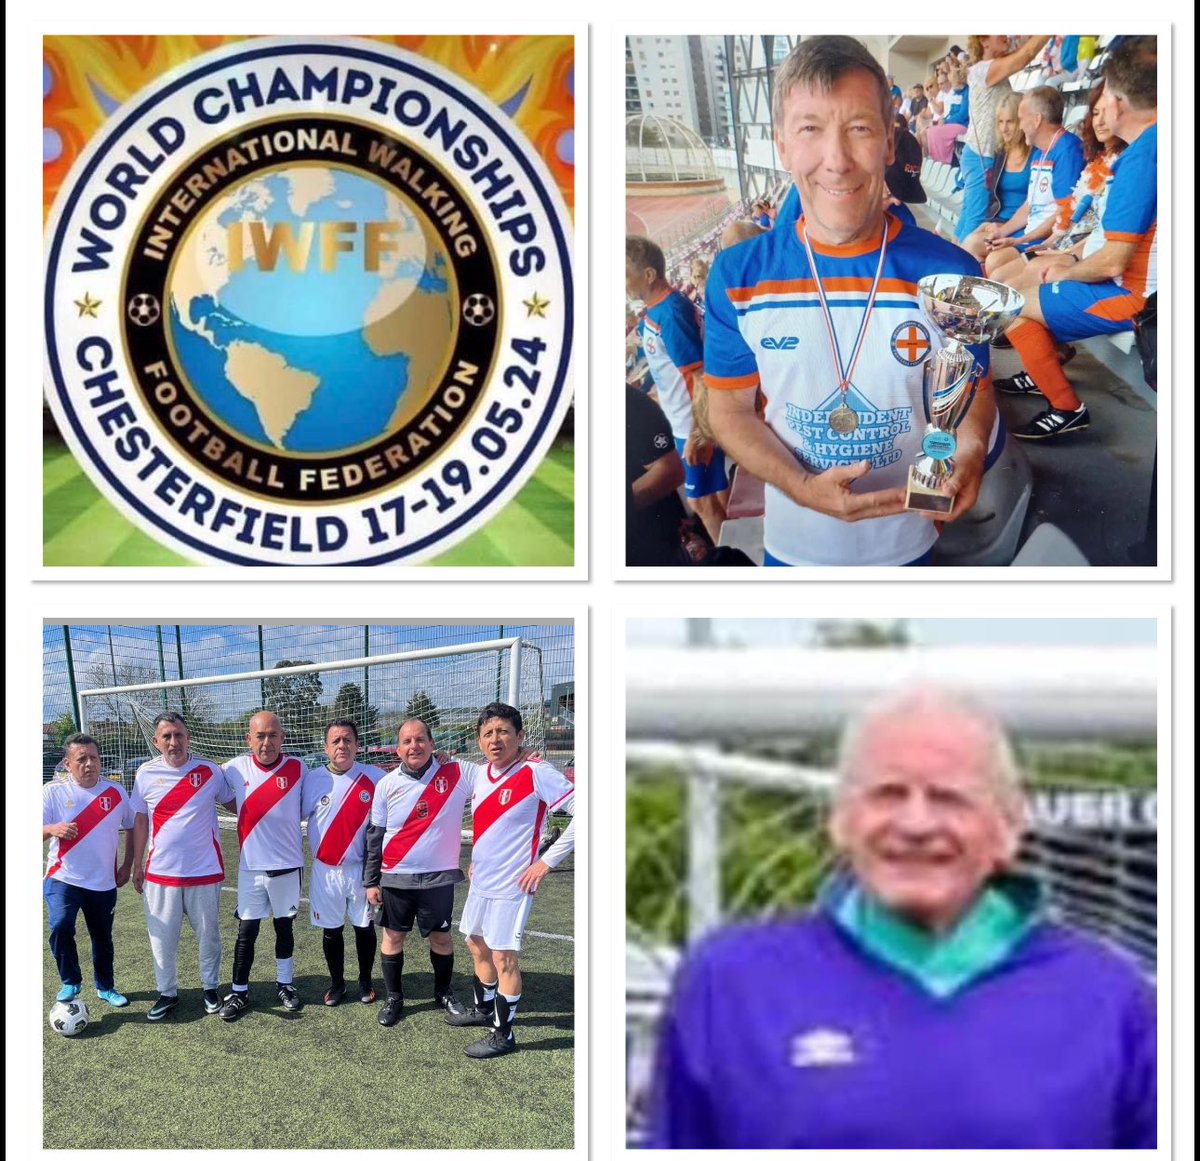 The Barnet Walking Football Team @HiveTrust @middxfa @BarnetFC Are proud of our players Ken Patterson & George Ferrar representing England at the IWFF WORLD CHAMPIONSHIPS at @ChesterfieldFC along with our Sth American players forming Team Peru Sam , Juan , Luis , Mani etc 🌟